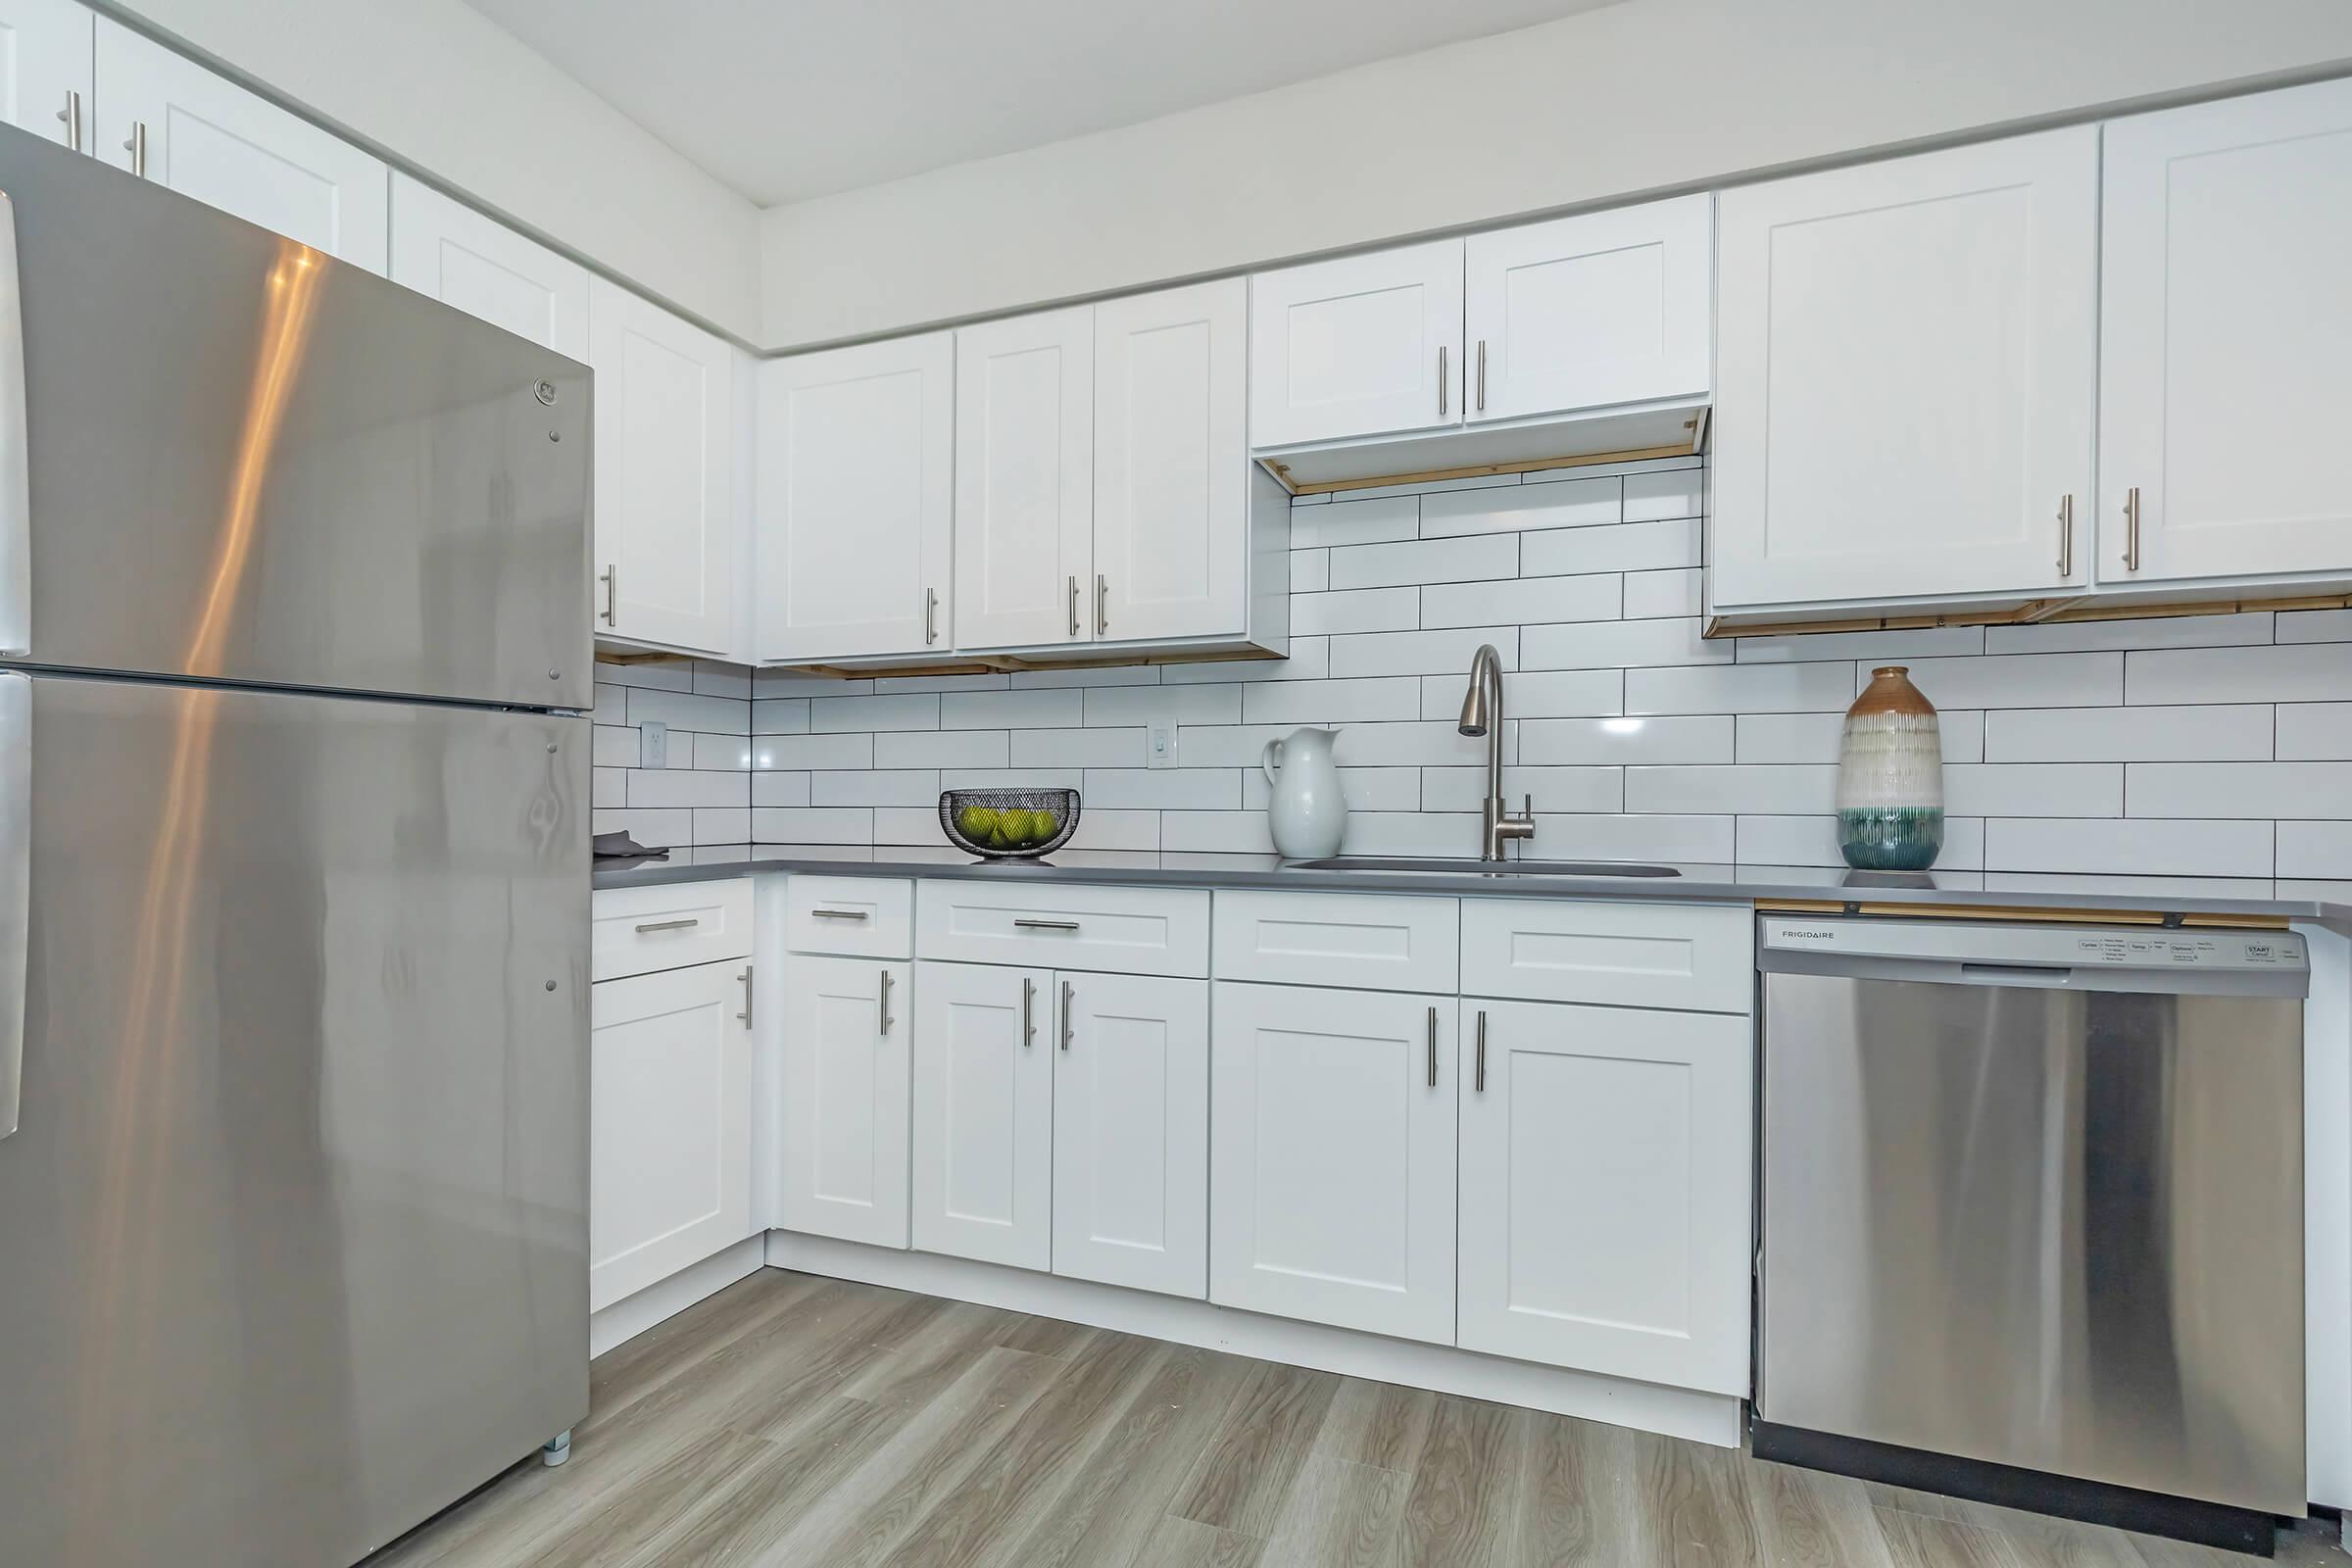 Luxury Apartments in Phoenix, AZ - Tides on 71st - Kitchen with White Cabinetry, Stainless Steel Silver Appliances, and Decorative Vases